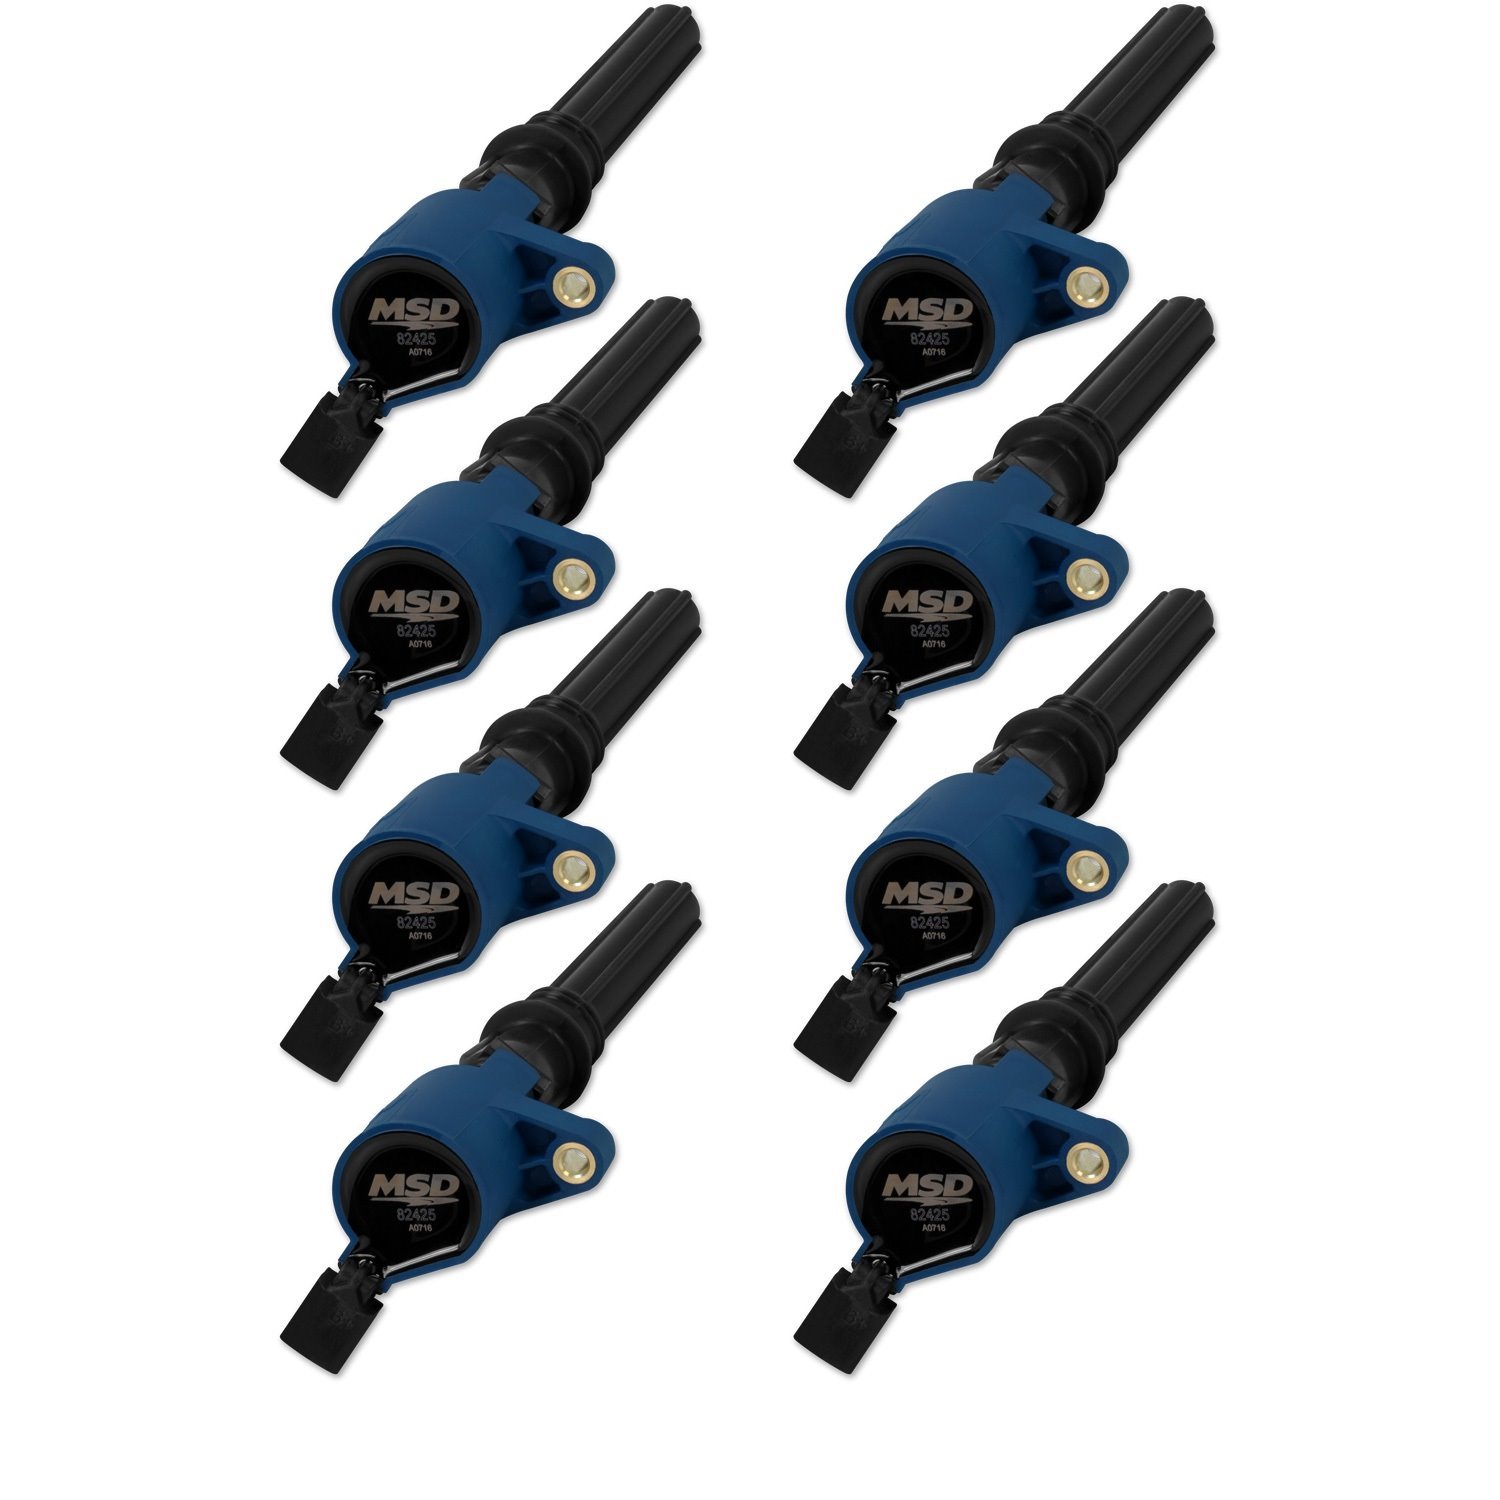 Direct Replacement Ignition Coil Set for 1999-2014 Ford 4.6/5.4L 2-Valve Engines, Blue - Set of 8